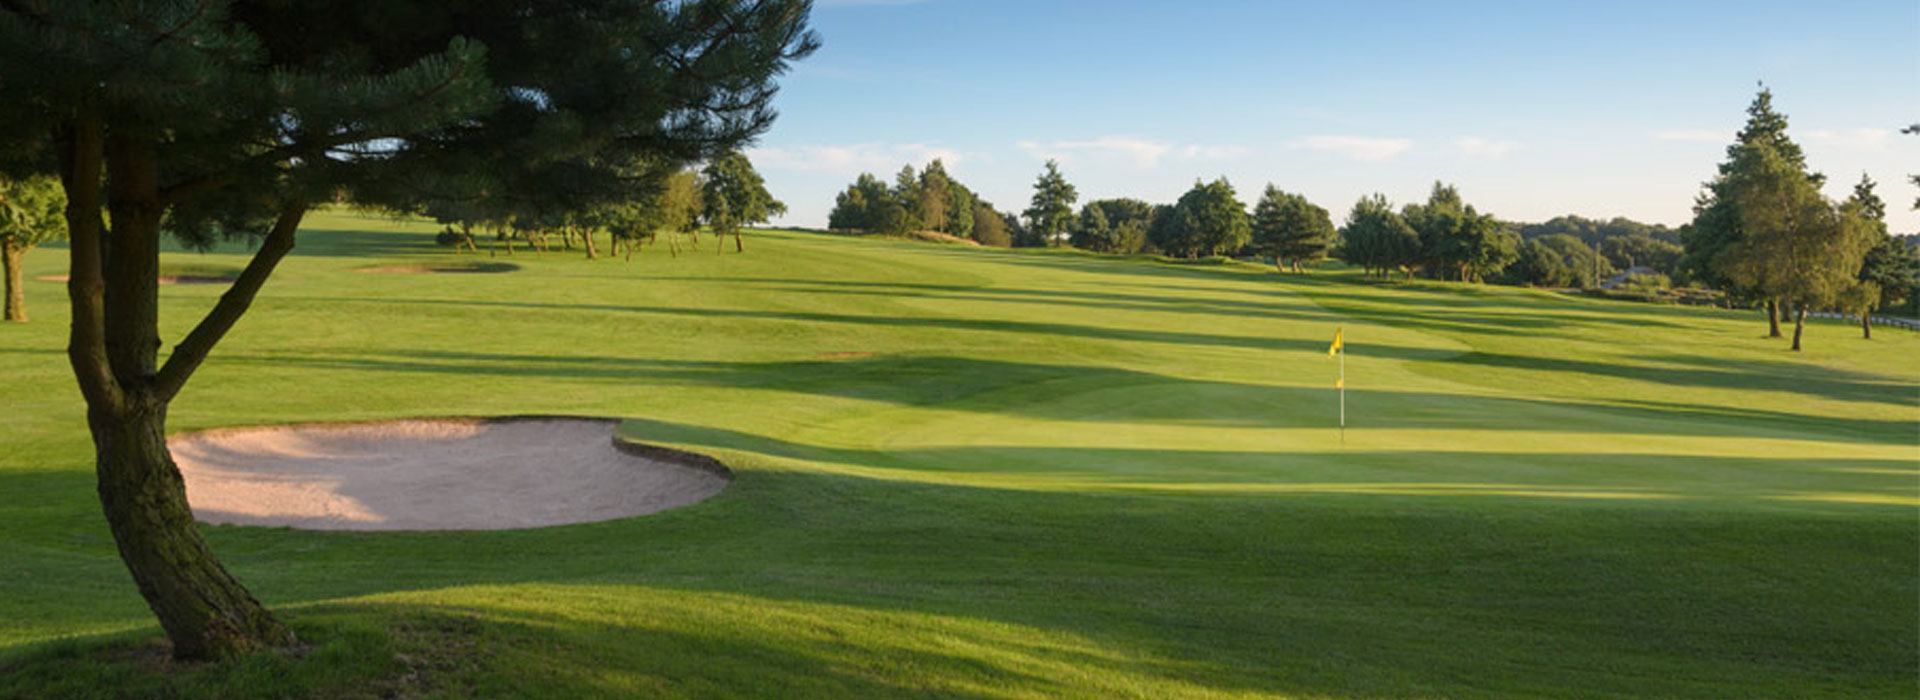 Golf Courses in Liverpool